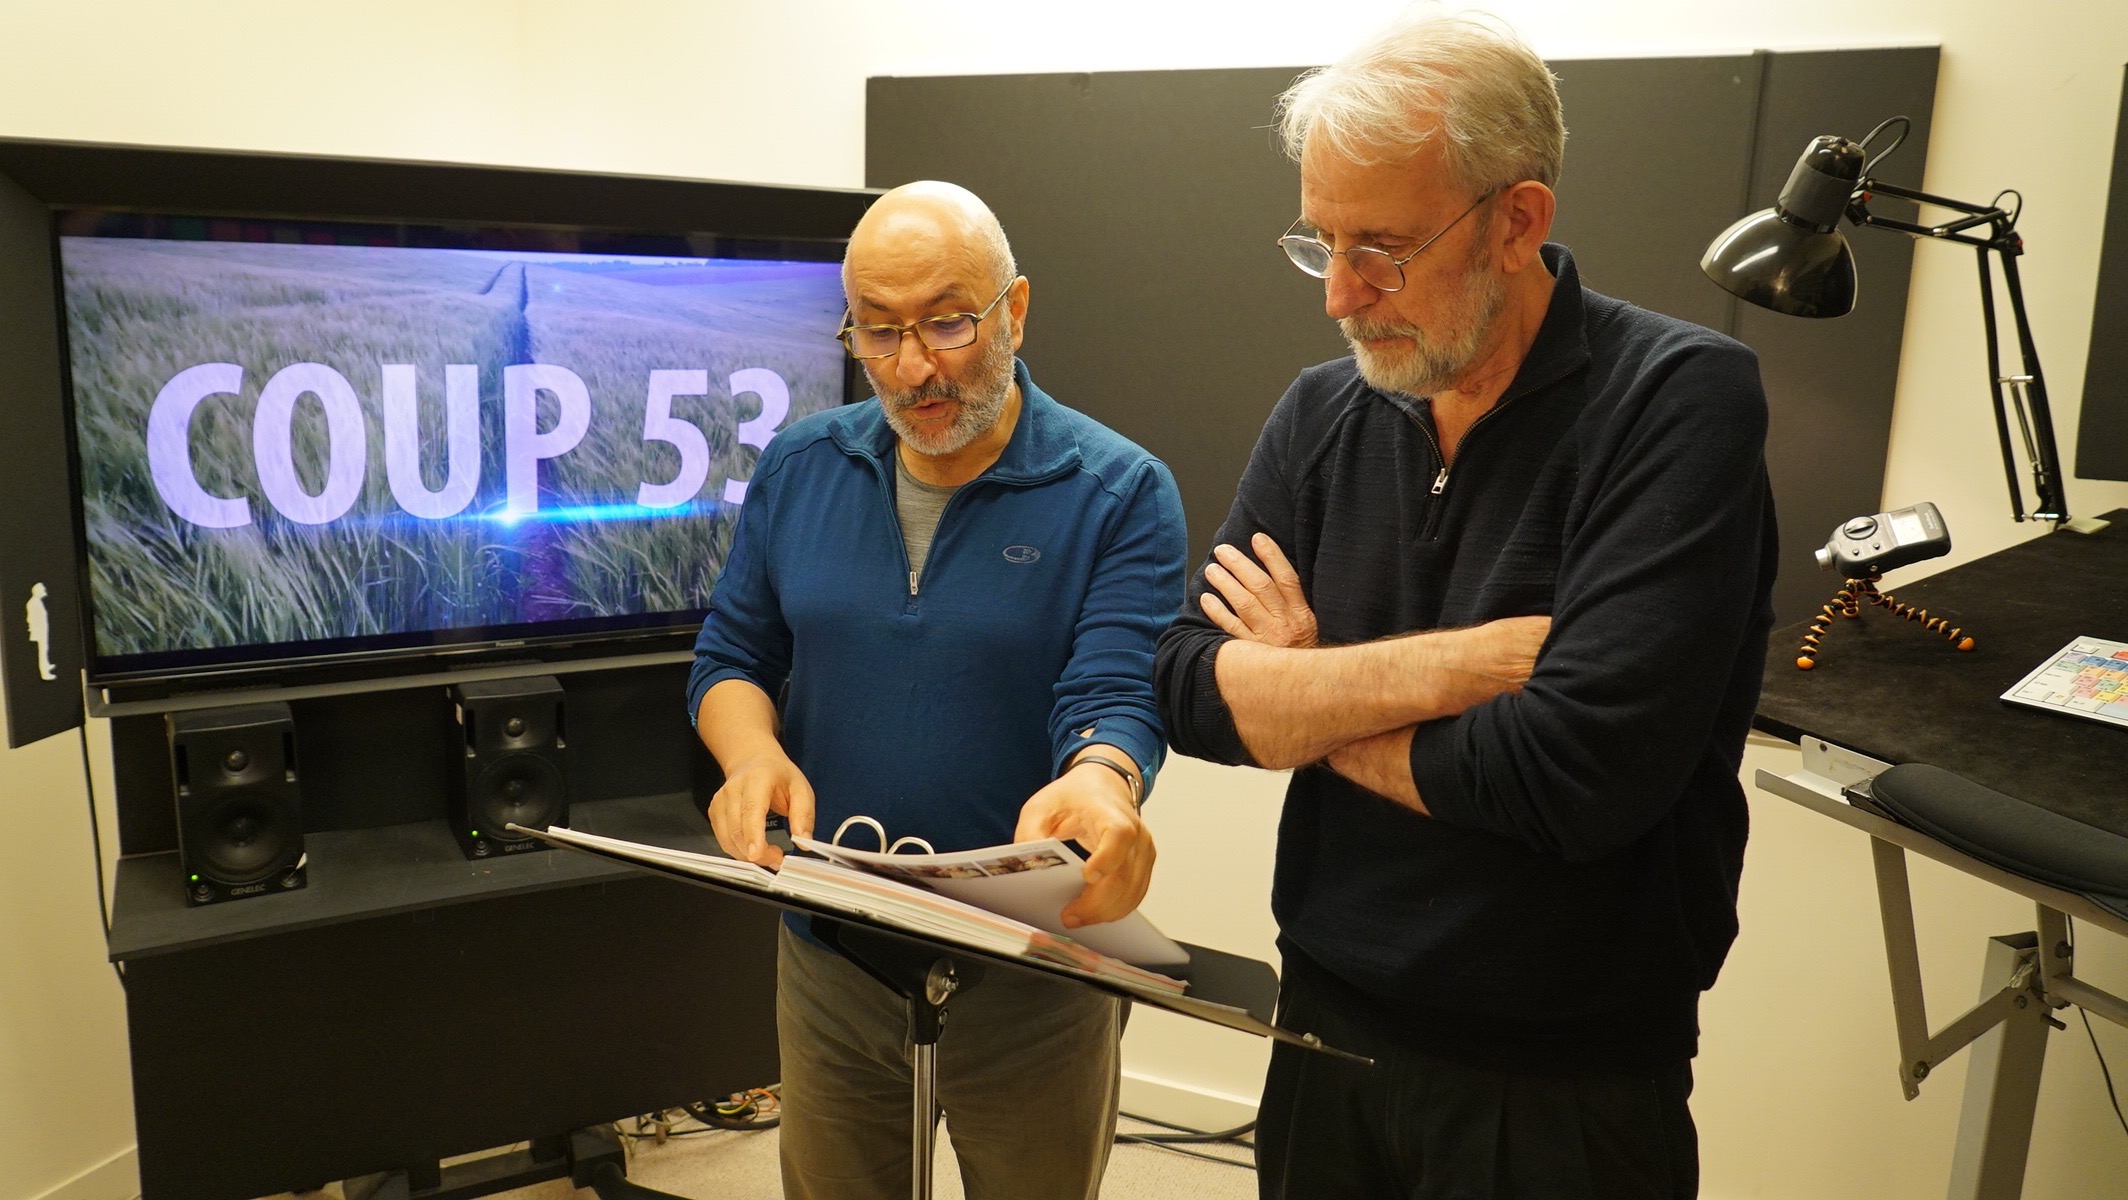 ART OF THE CUT with Walter Murch, ACE, on editing "Coup 53" 2